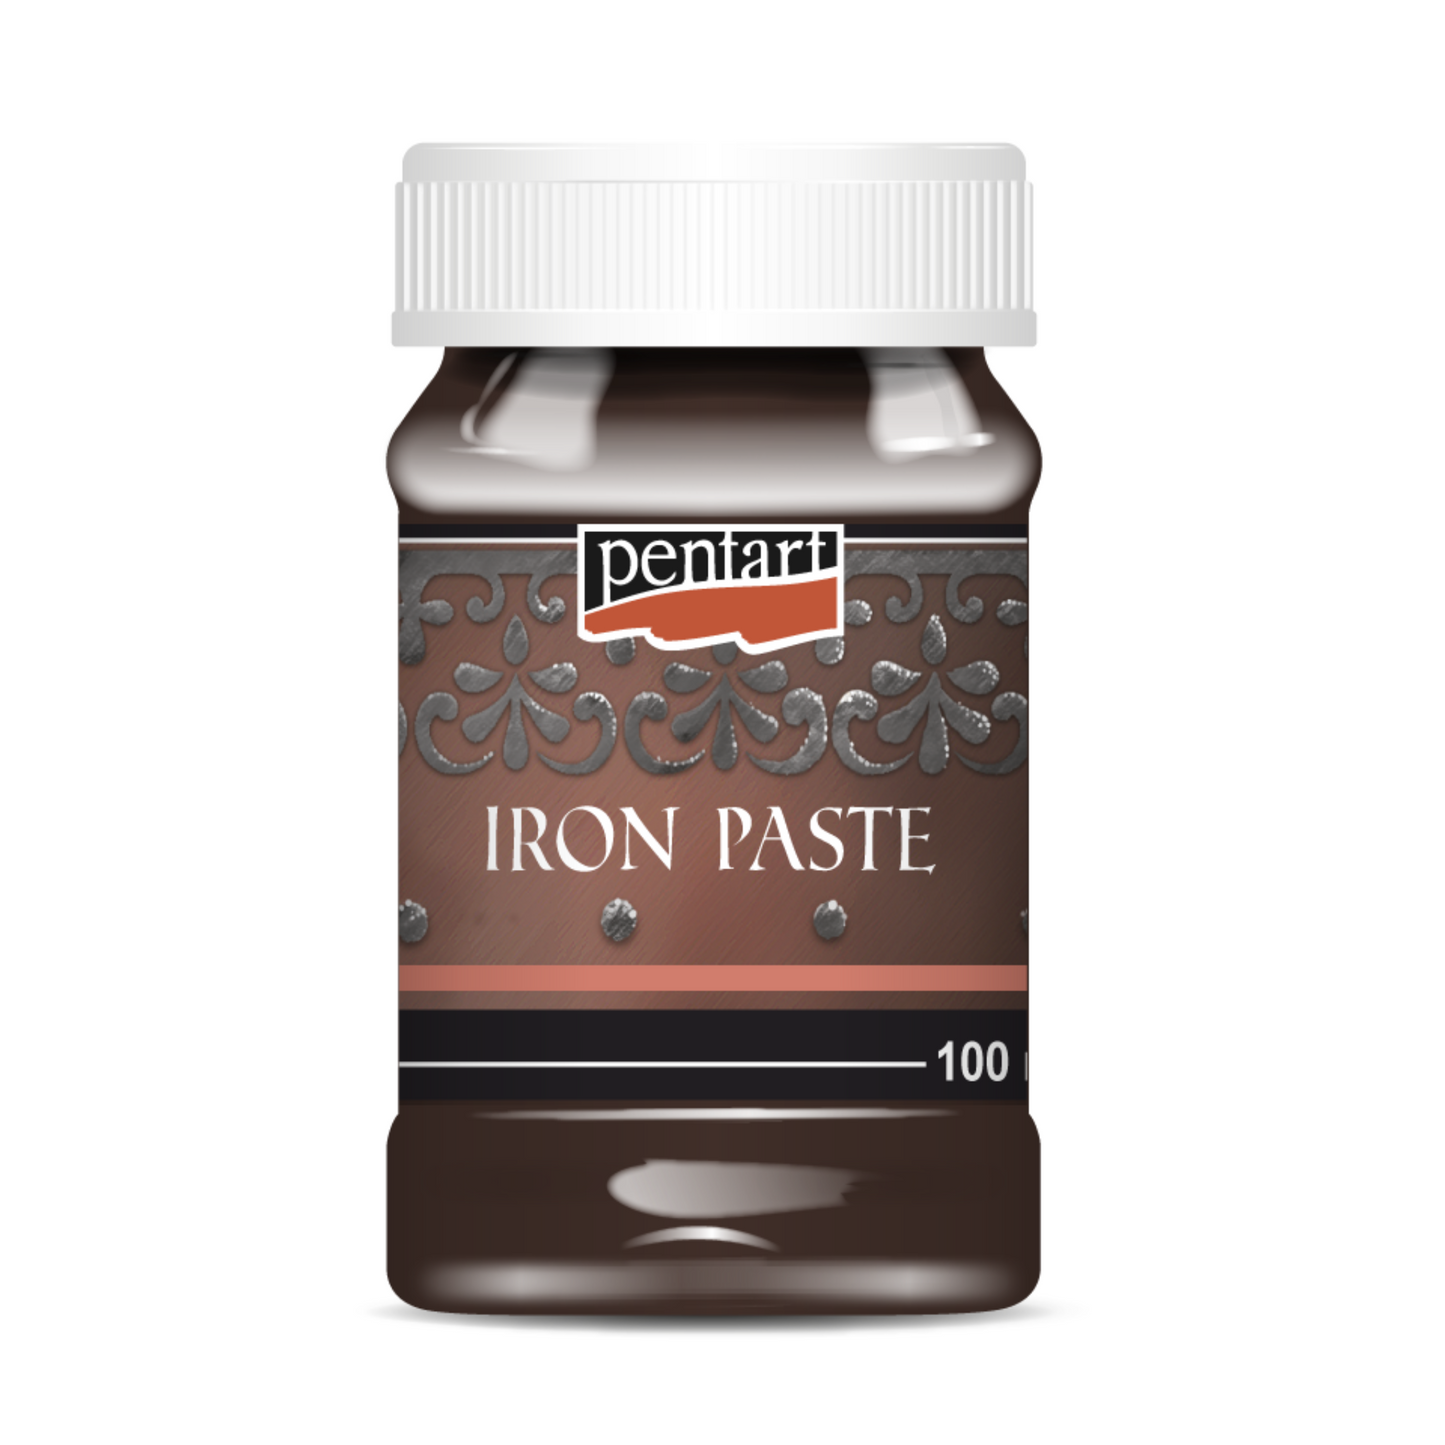 Pentart Iron Paste in Red/Brown, 100 ml available at Milton's Daughter